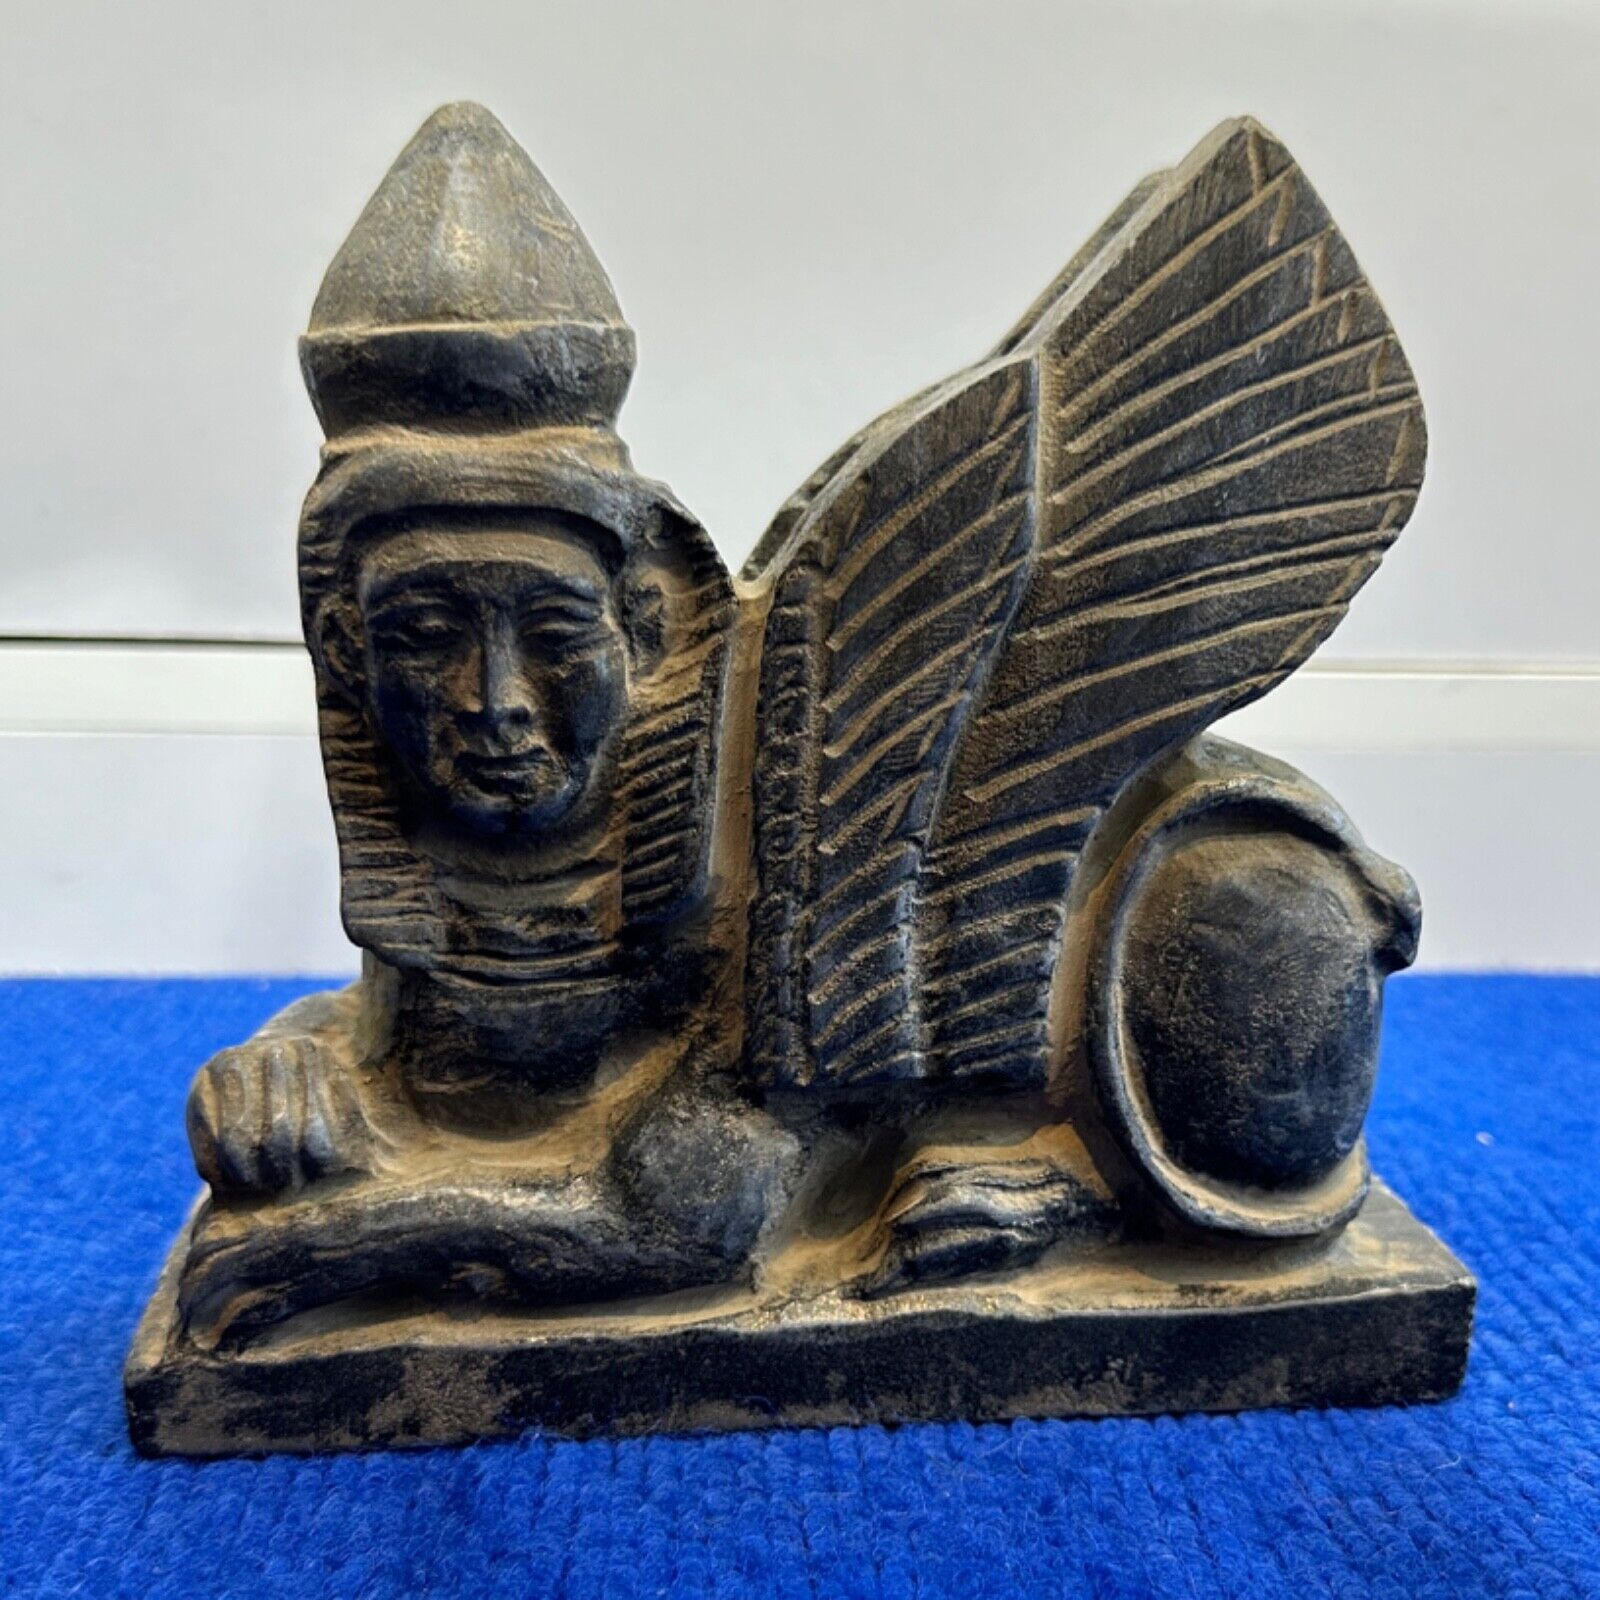 Unique ancient near eastern large winged diety figure